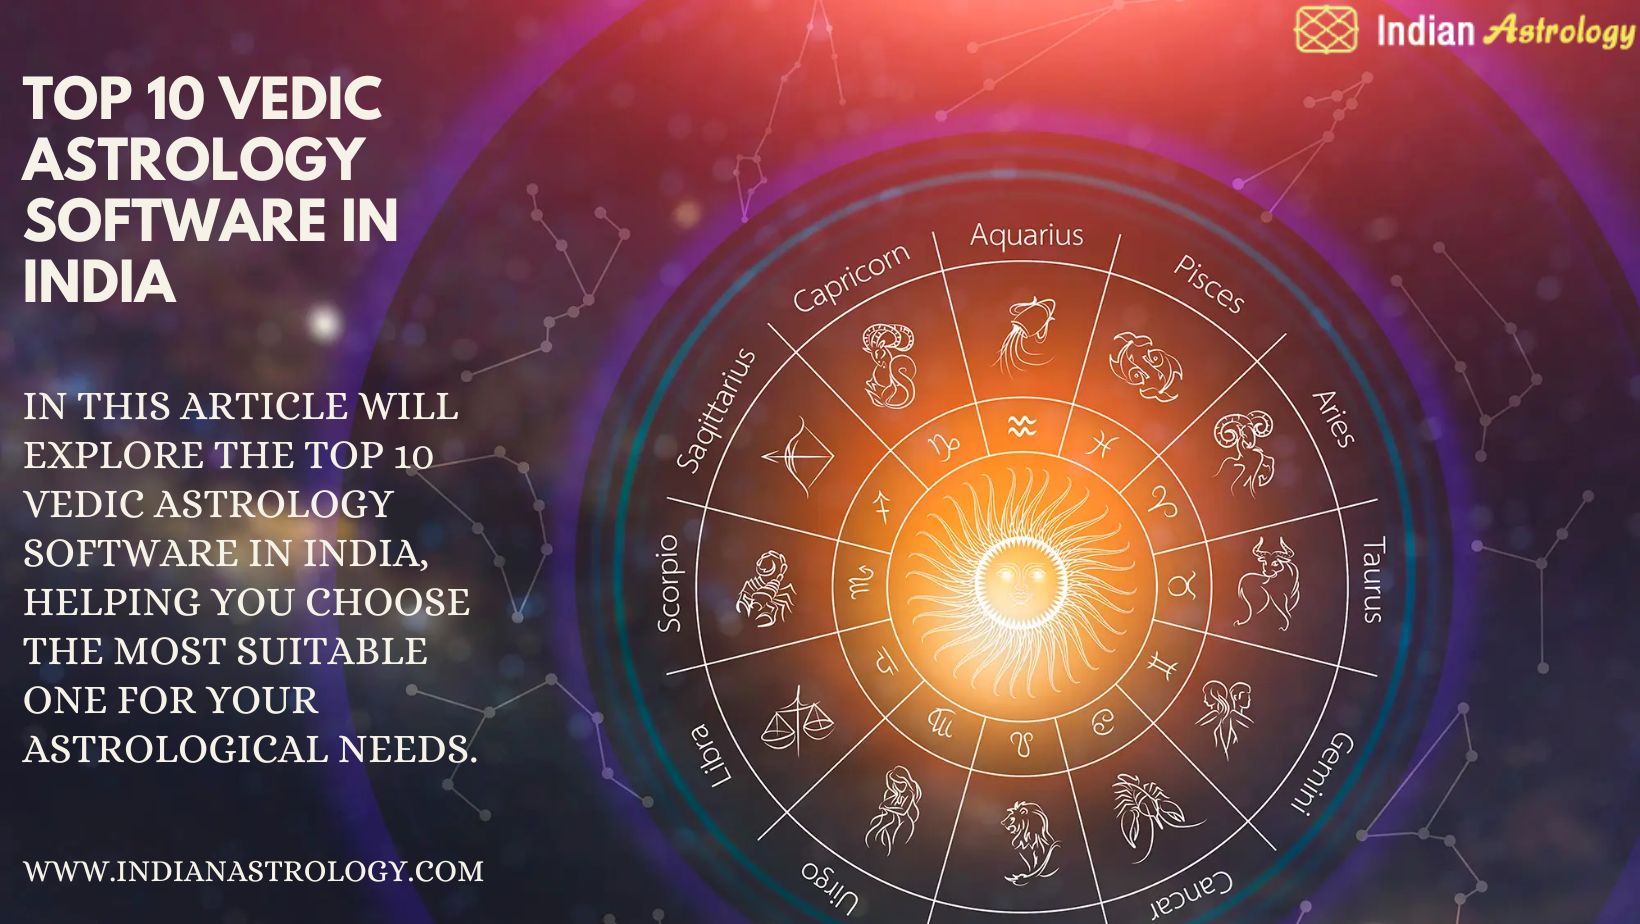 Top 10 Vedic Astrology Software in India